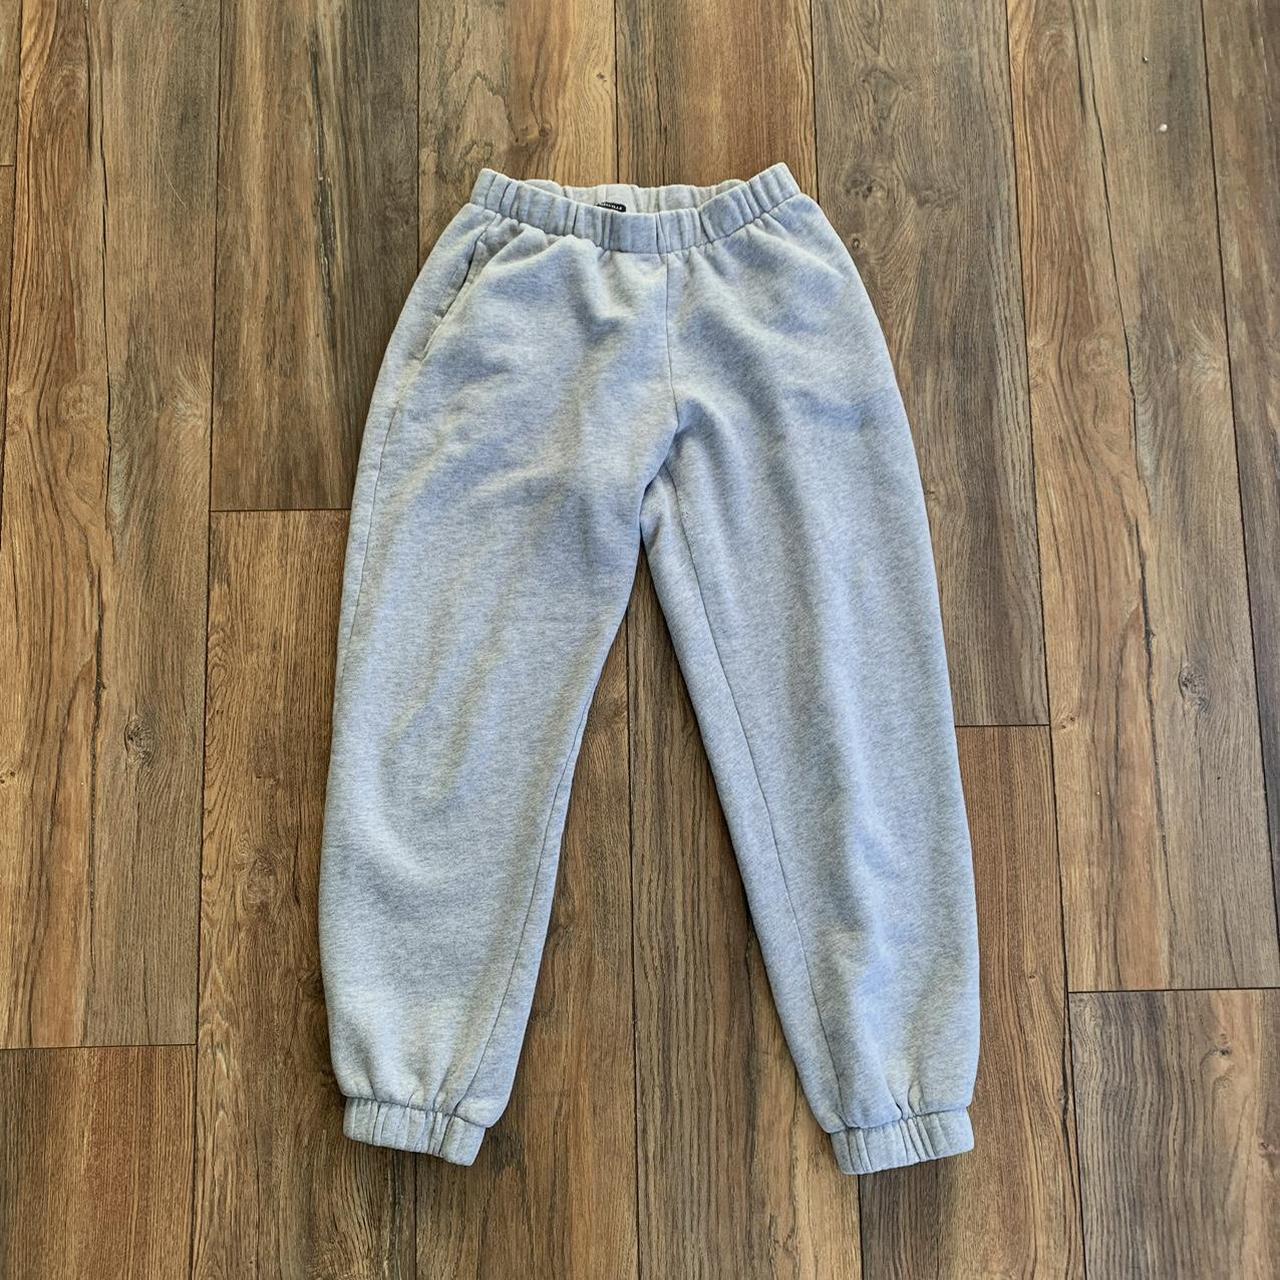 Brandy Melville Set • Brandy Melville Christy Hoodie • Brandy Melville Rosa  Sweatpants for Sale in Moreno Valley, CA - OfferUp